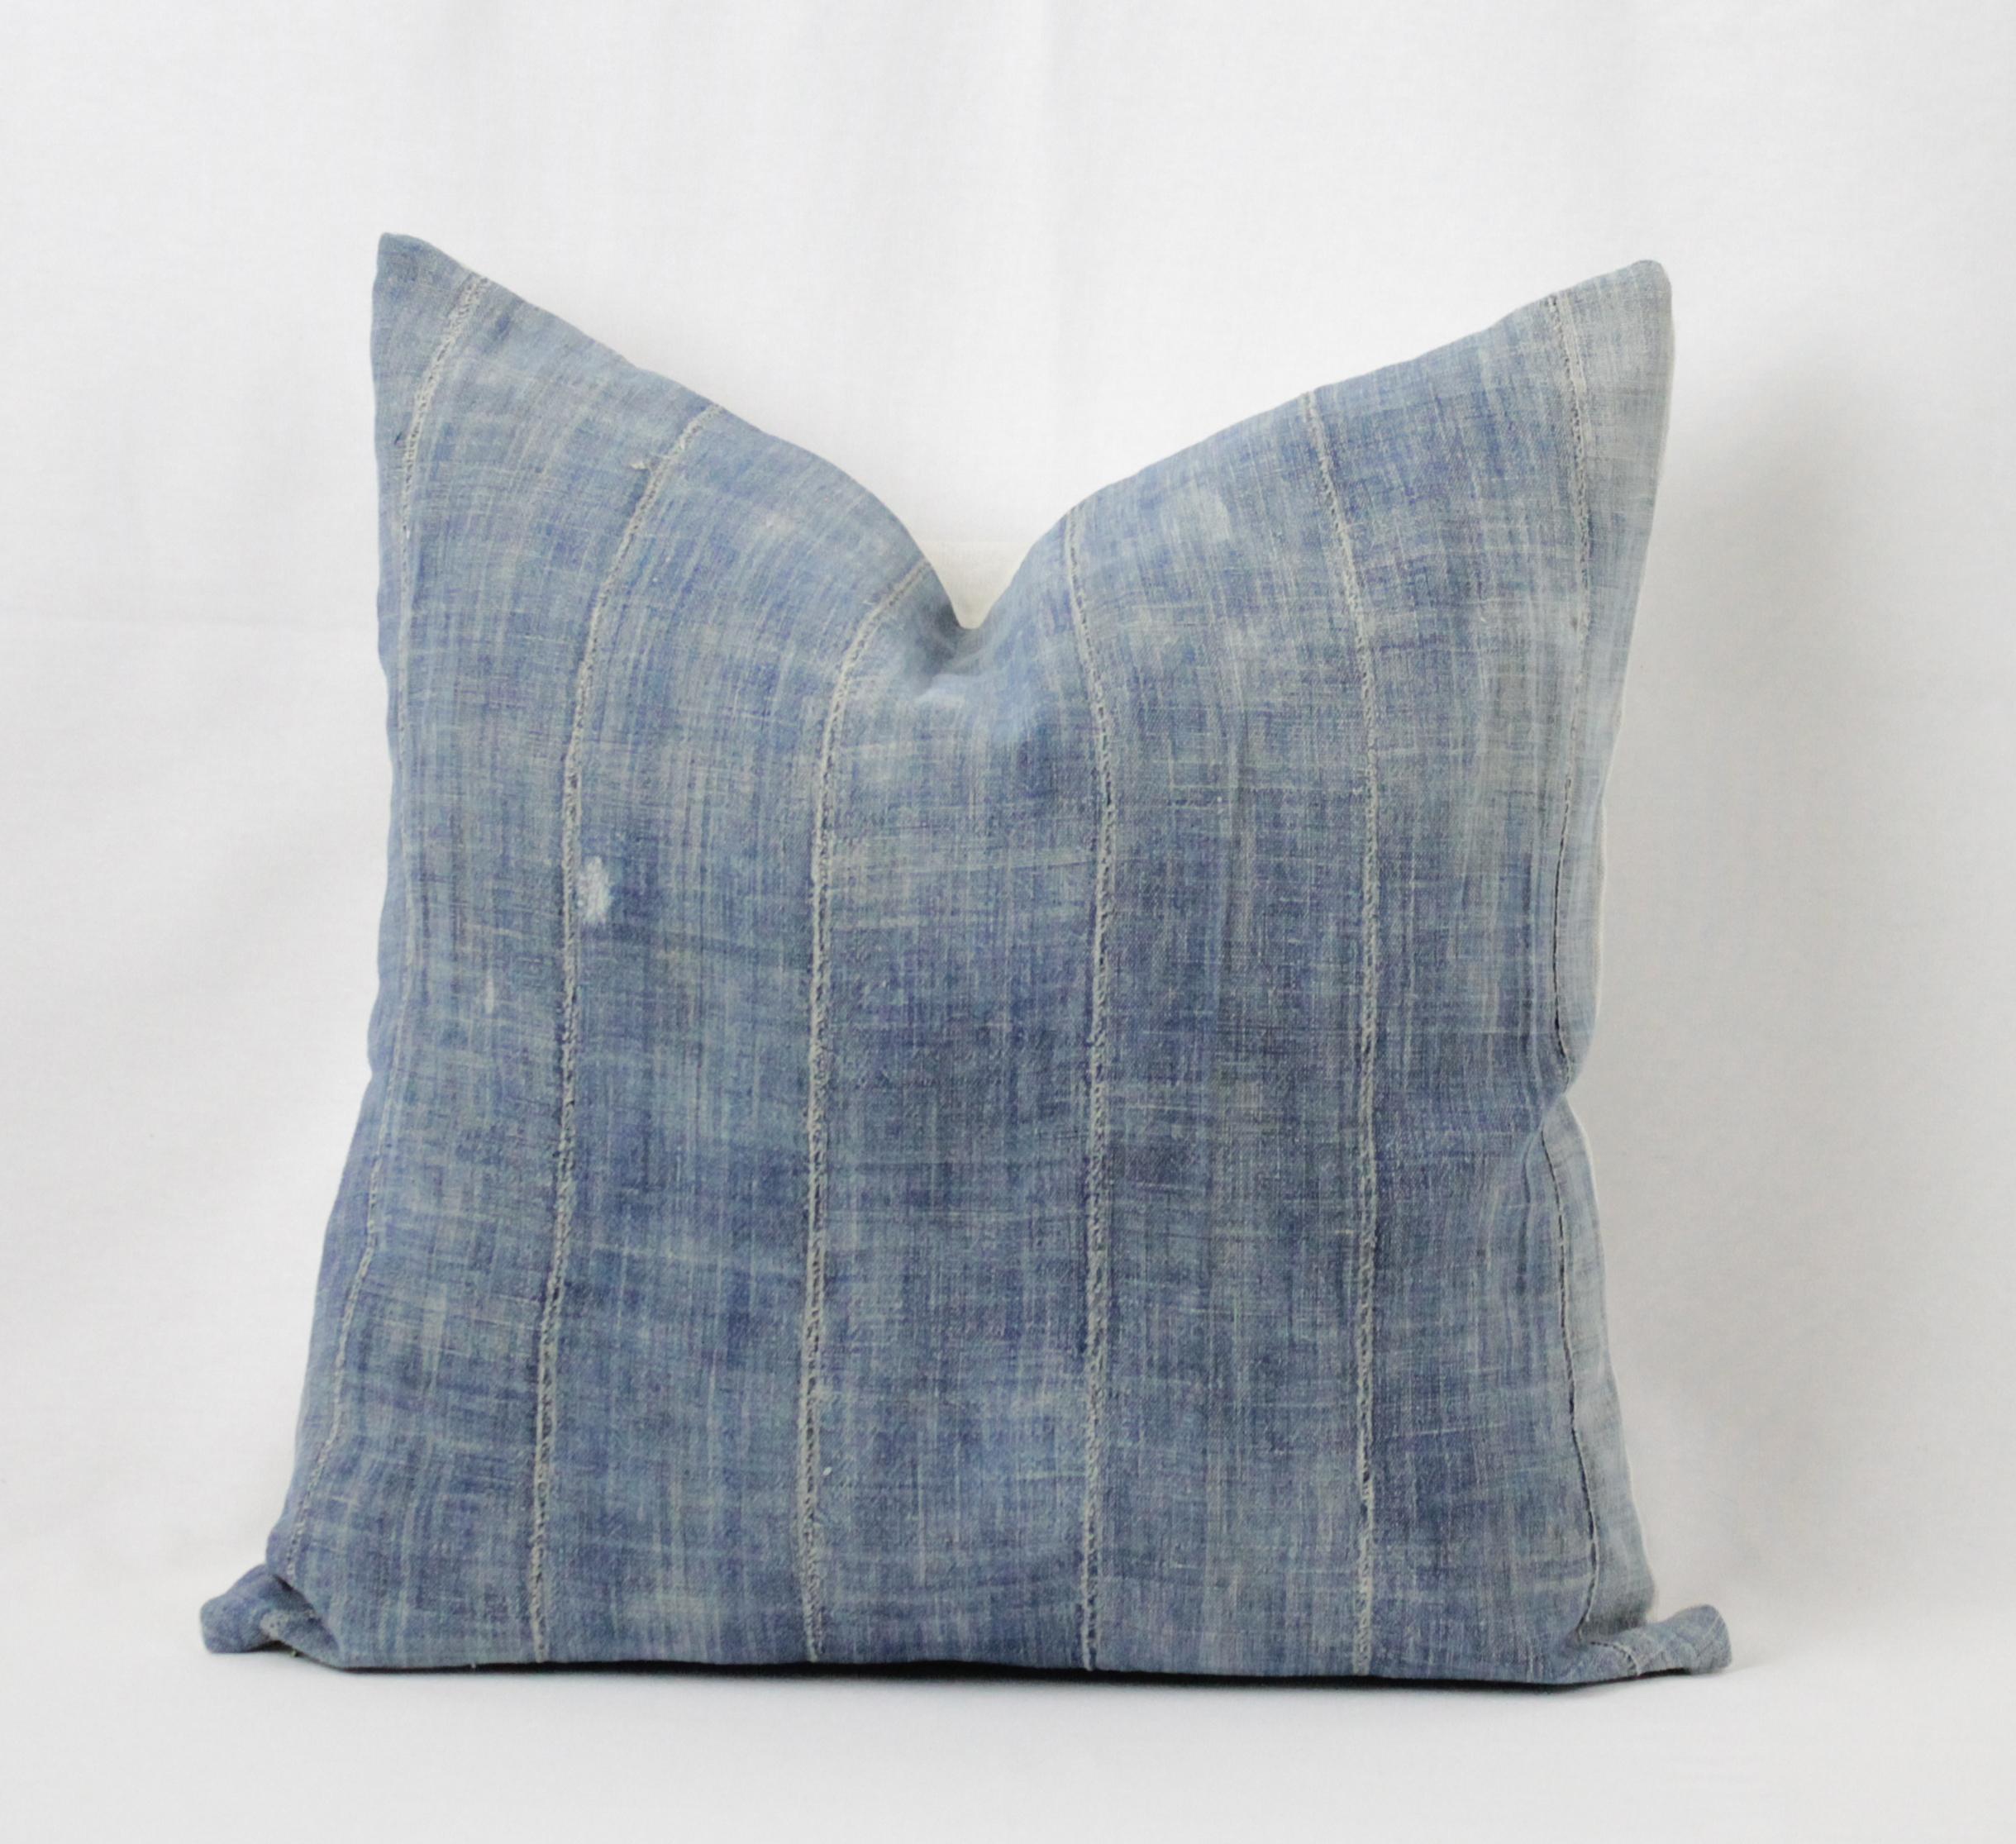 Blue distressed pillow with vertical seams, with zipper closure. Back is in a natural linen, finished with overlocked edges. Pillow has purposeful distressed areas, see pictures. Pillow is also lined with a natural linen. Main colors are blue. Does